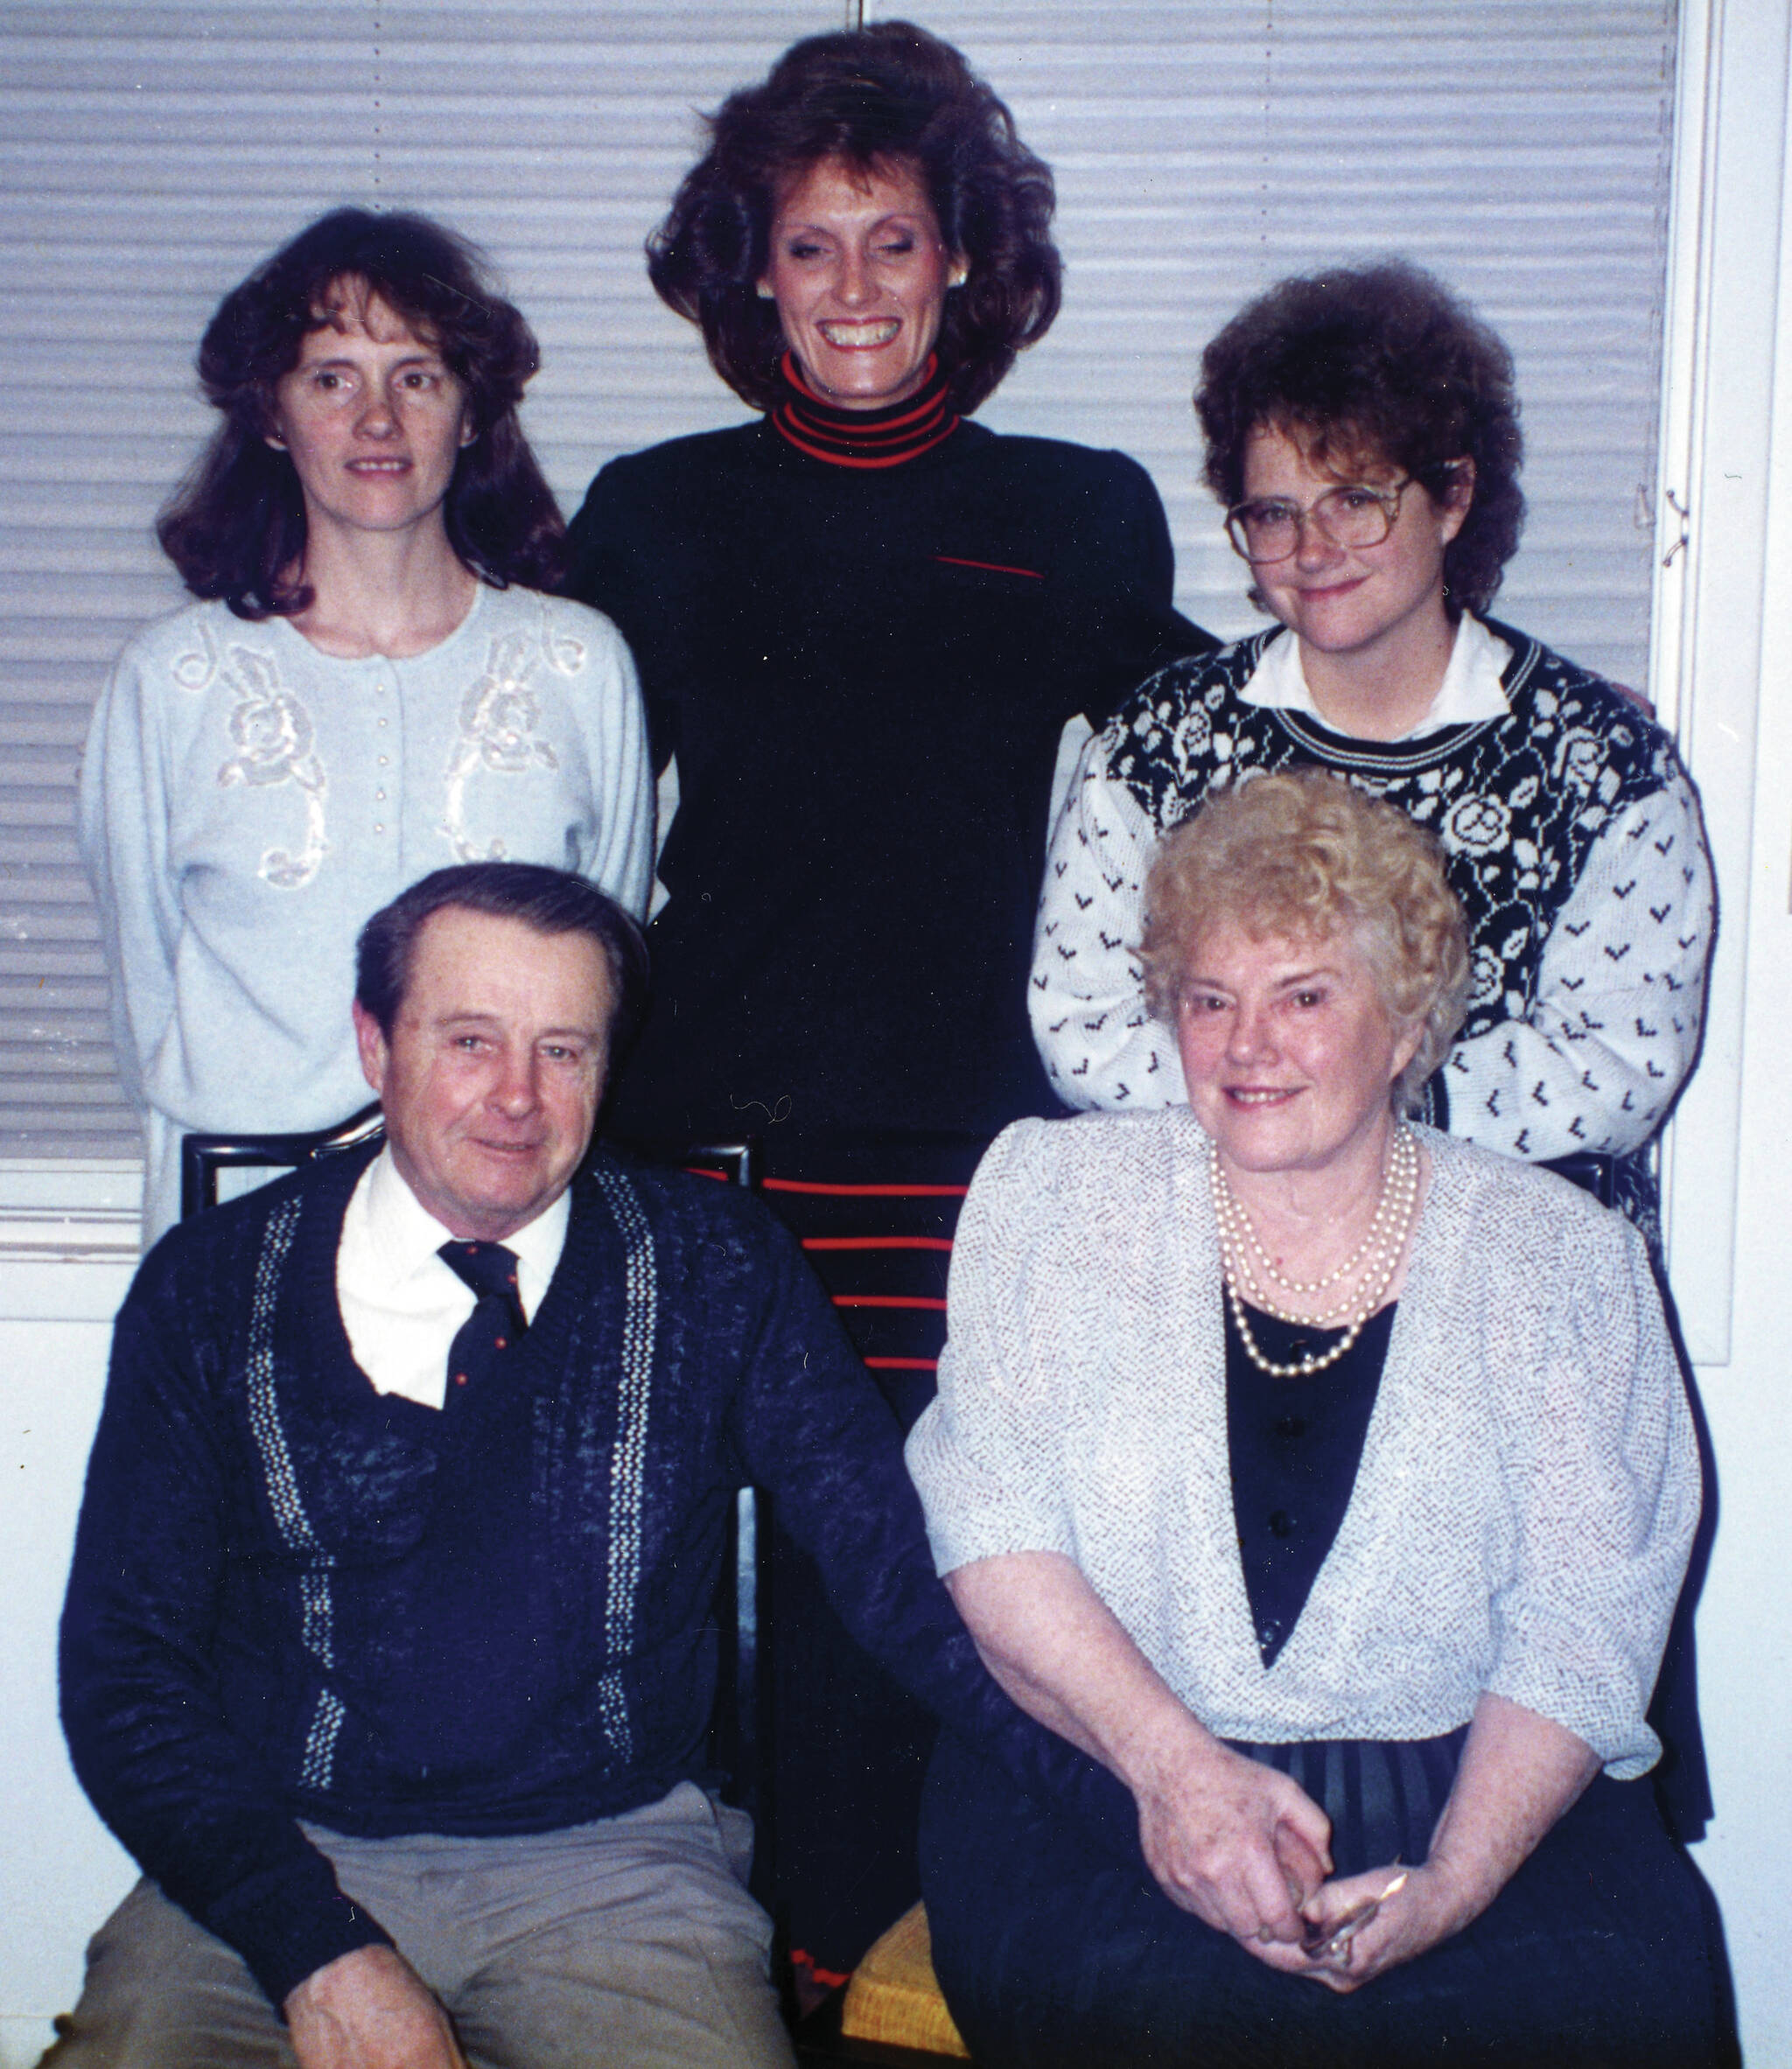 The whole Lancashire family got together for a group photo in 1989 on the occasion of Rusty and Larry’s 50th wedding anniversary. Back row (L-R) are Martha, Lori and Abby. (Photo courtesy of the Lancashire Family Collection.)